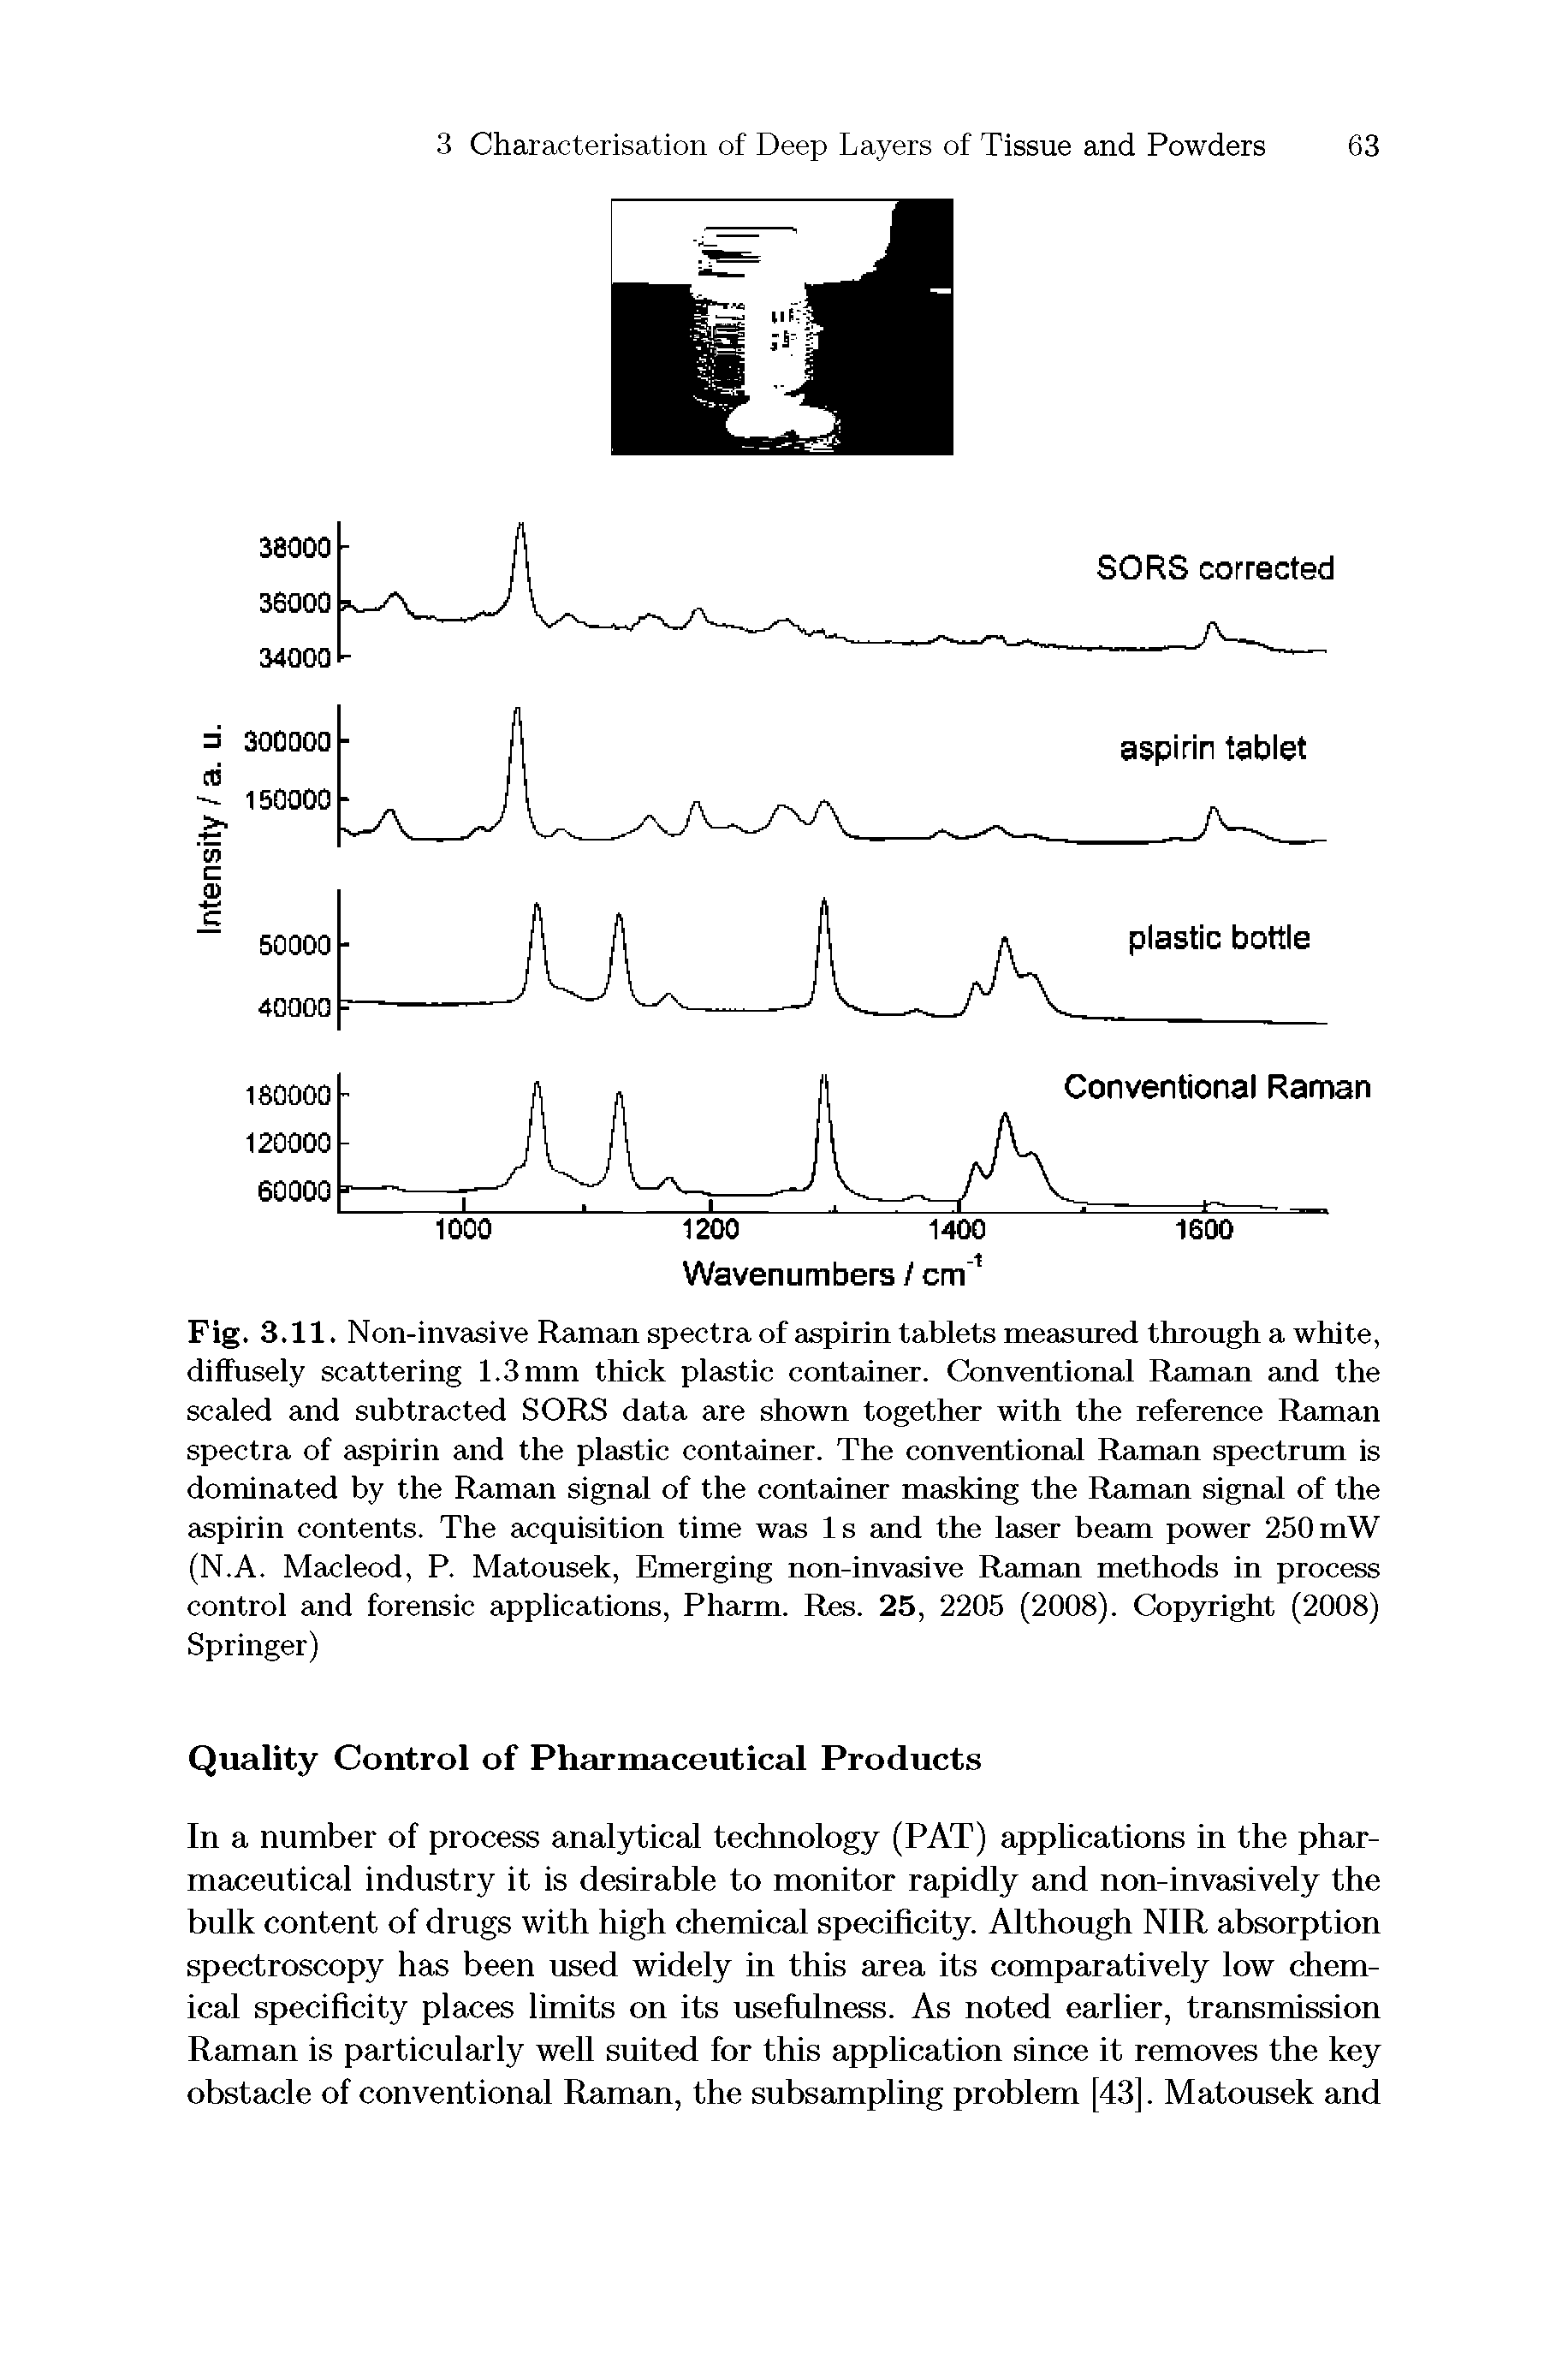 Fig. 3.11. Non-invasive Raman spectra of aspirin tablets measured through a white, diffusely scattering 1.3 mm thick plastic container. Conventional Raman and the scaled and subtracted SORS data are shown together with the reference Raman spectra of aspirin and the plastic container. The conventional Raman spectrum is dominated by the Raman signal of the container masking the Raman signal of the aspirin contents. The acquisition time was Is and the laser beam power 250mW (N.A. Macleod, P. Matousek, Emerging non-invasive Raman methods in process control and forensic applications, Pharm. Res. 25, 2205 (2008). Copyright (2008) Springer)...